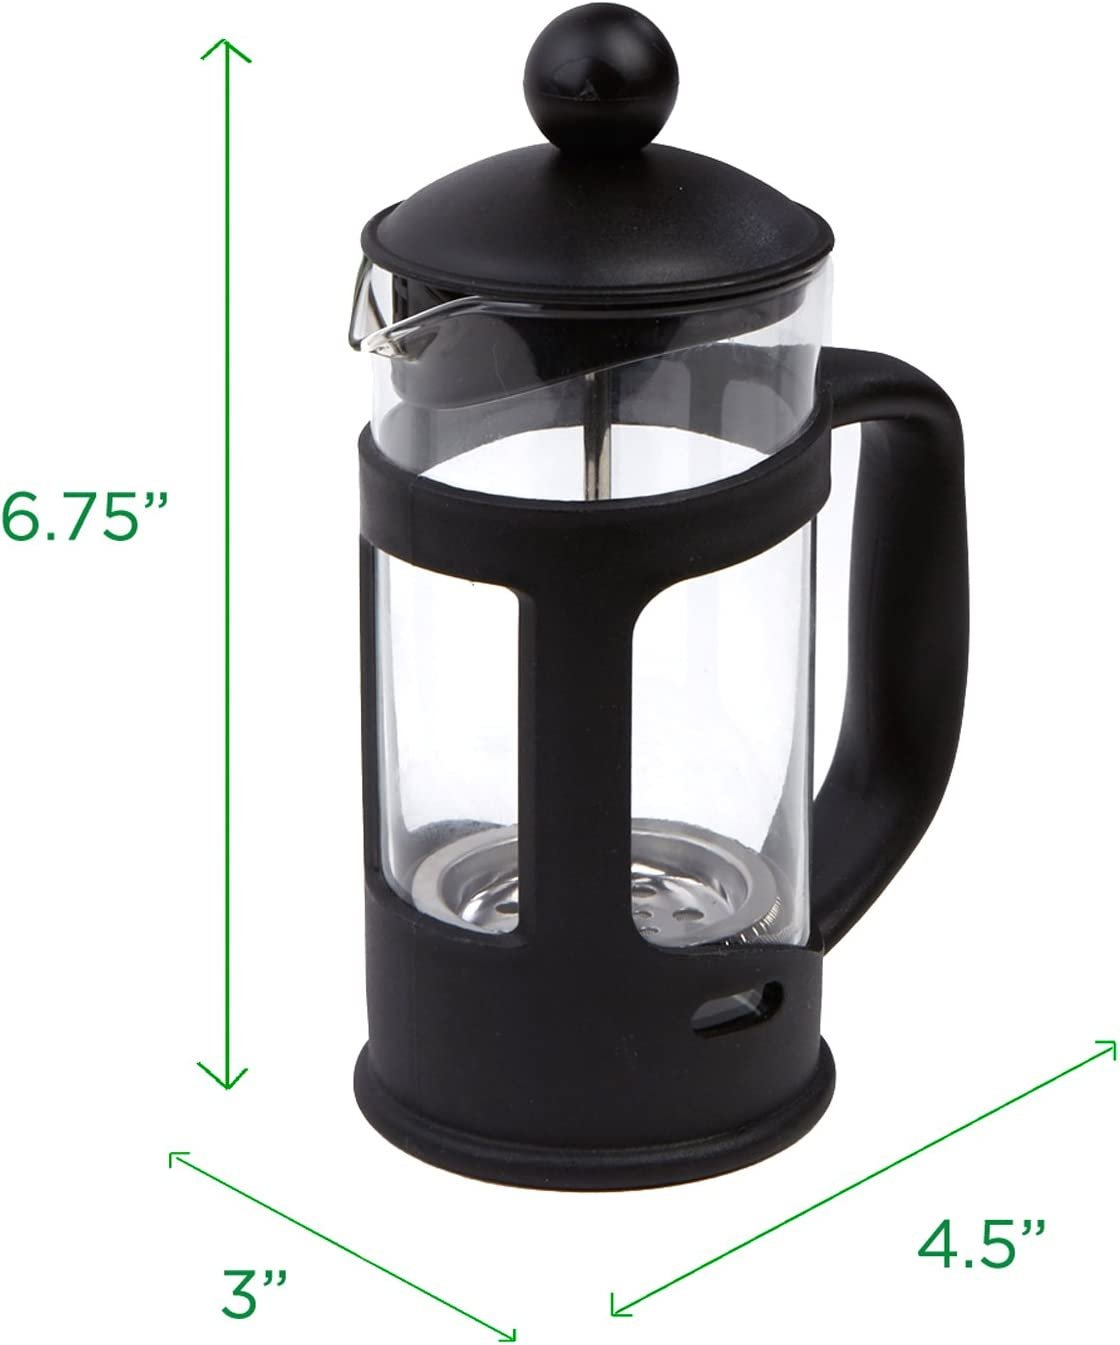 Mueller Hydro Press French Press Coffee And Tea Maker Offer